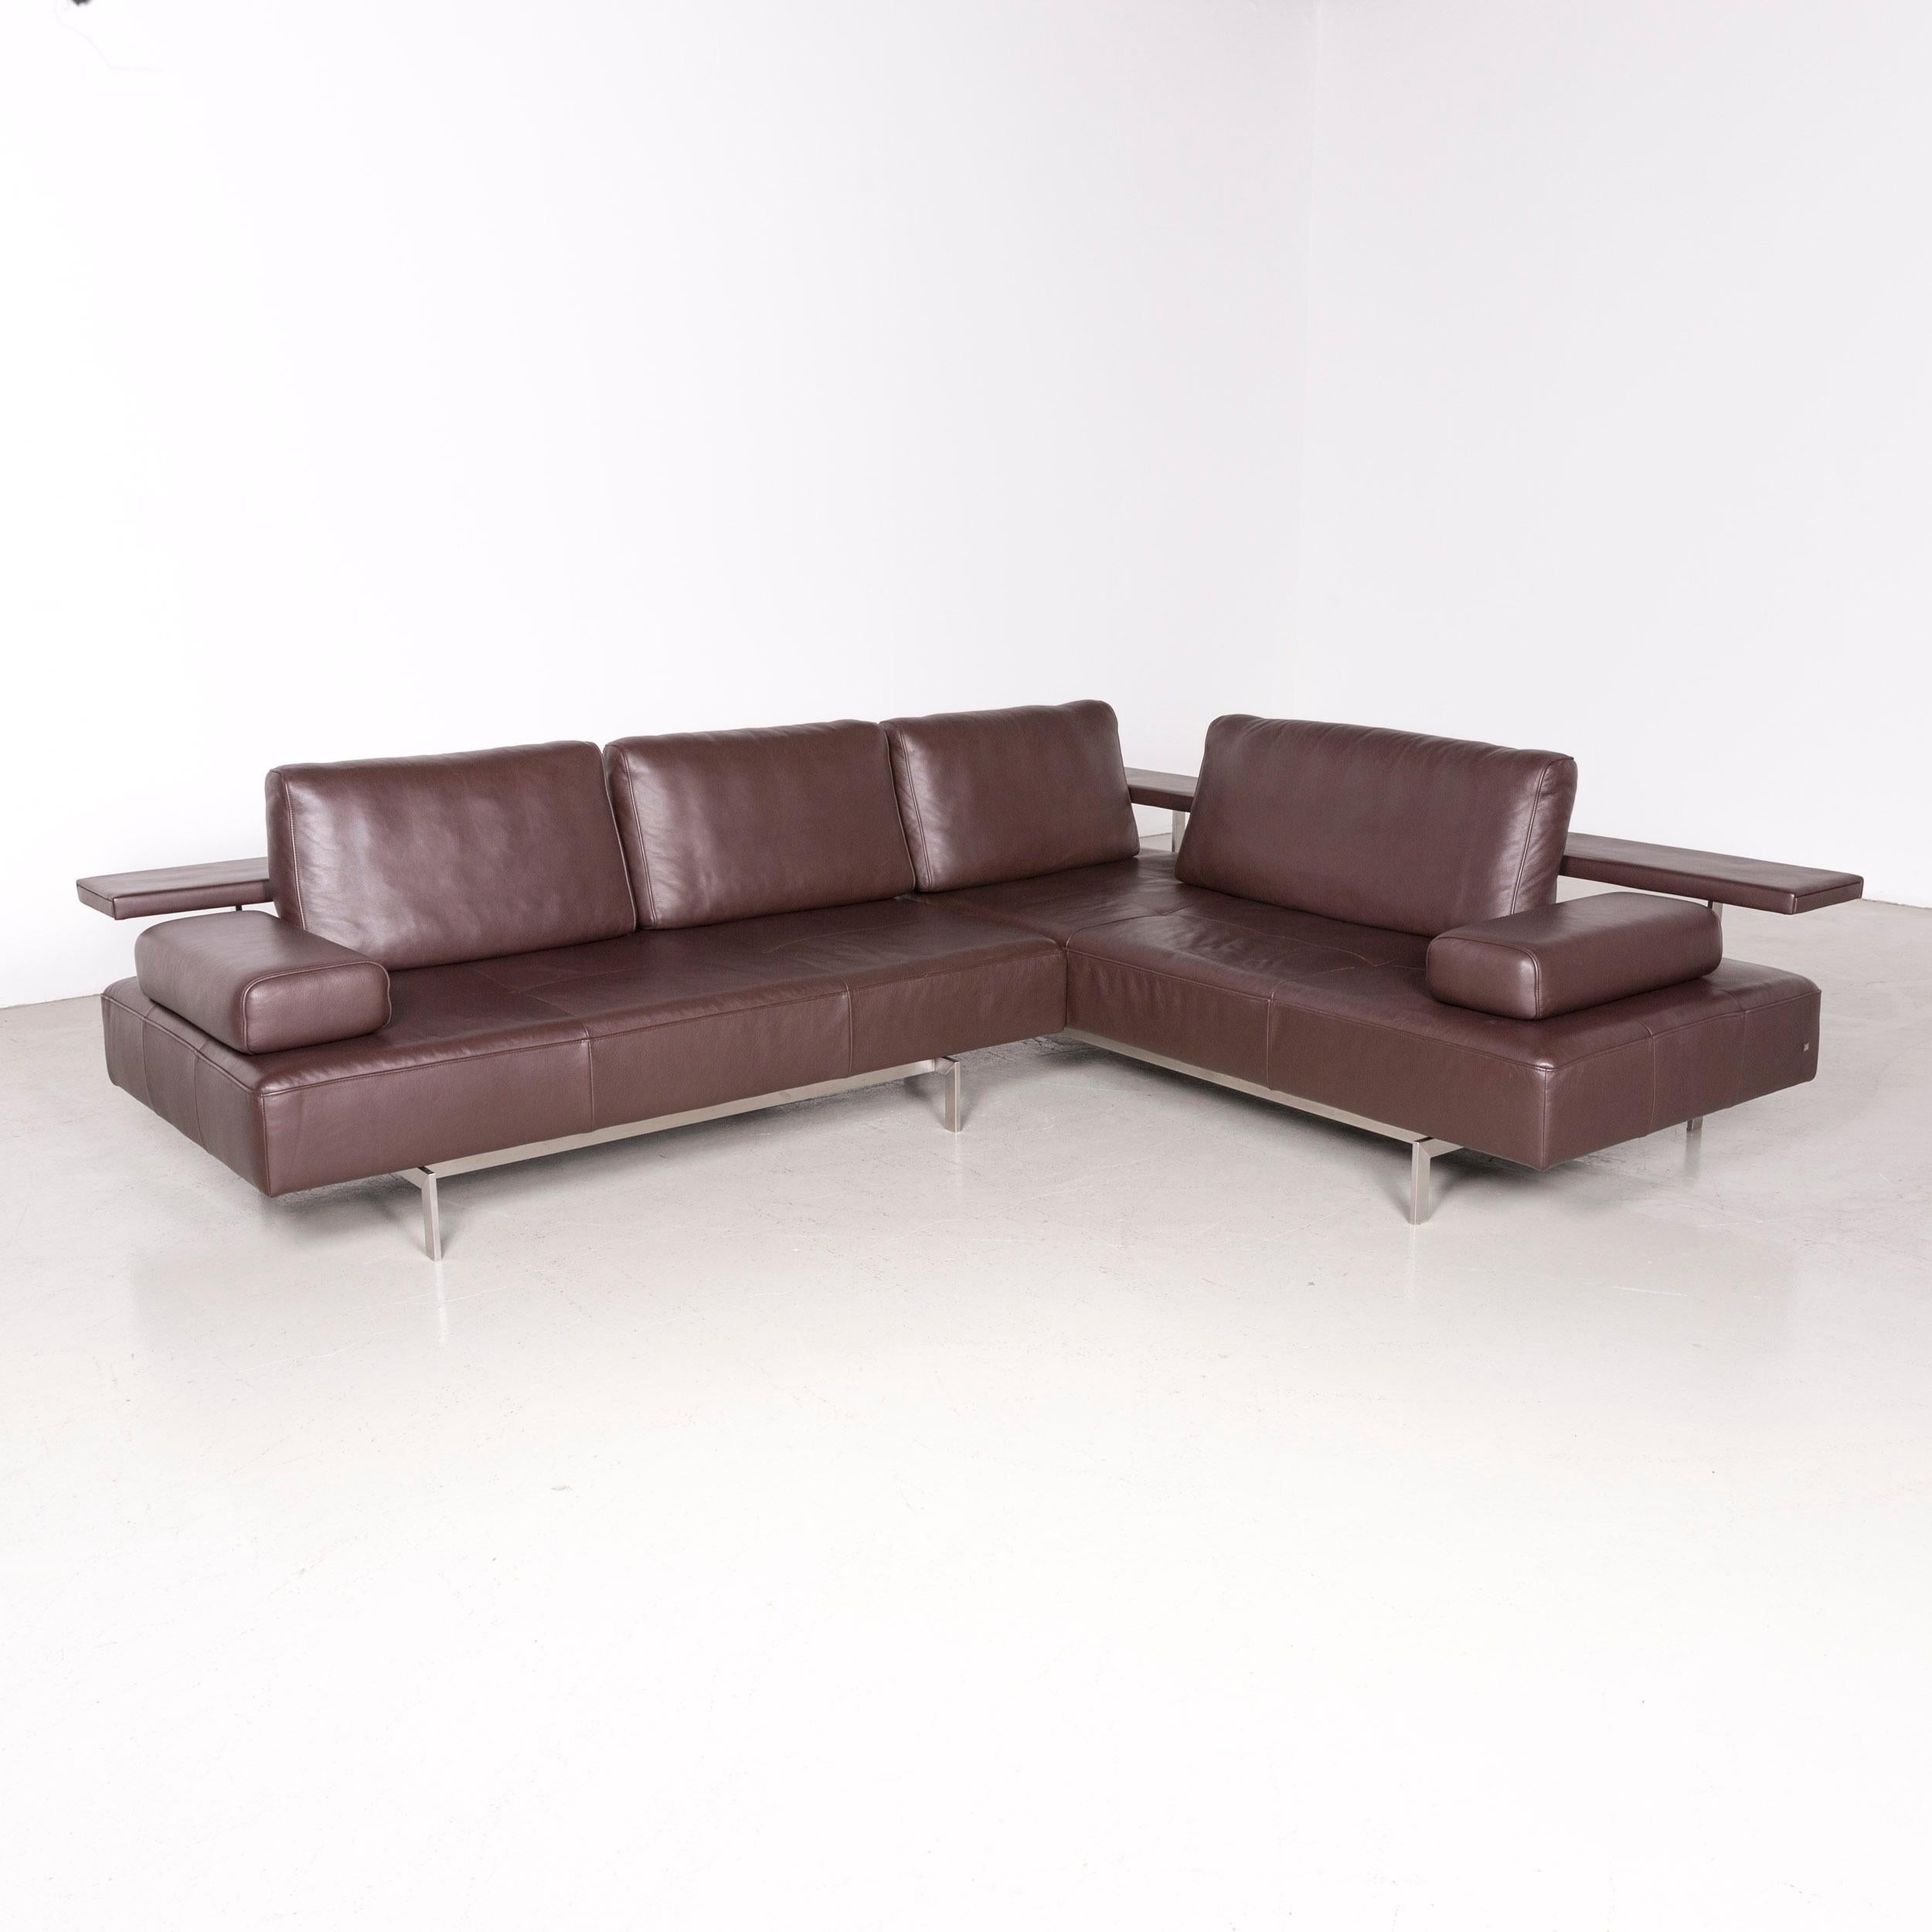 We bring to you a Rolf Benz Dono designer leather corner sofa brown genuine leather sofa couch.

Product measurements in centimeters:

Depth: 105
Width: 300
Height: 90
Seat-height: 40
Rest-height: 60
Seat-depth: 55
Seat-width: